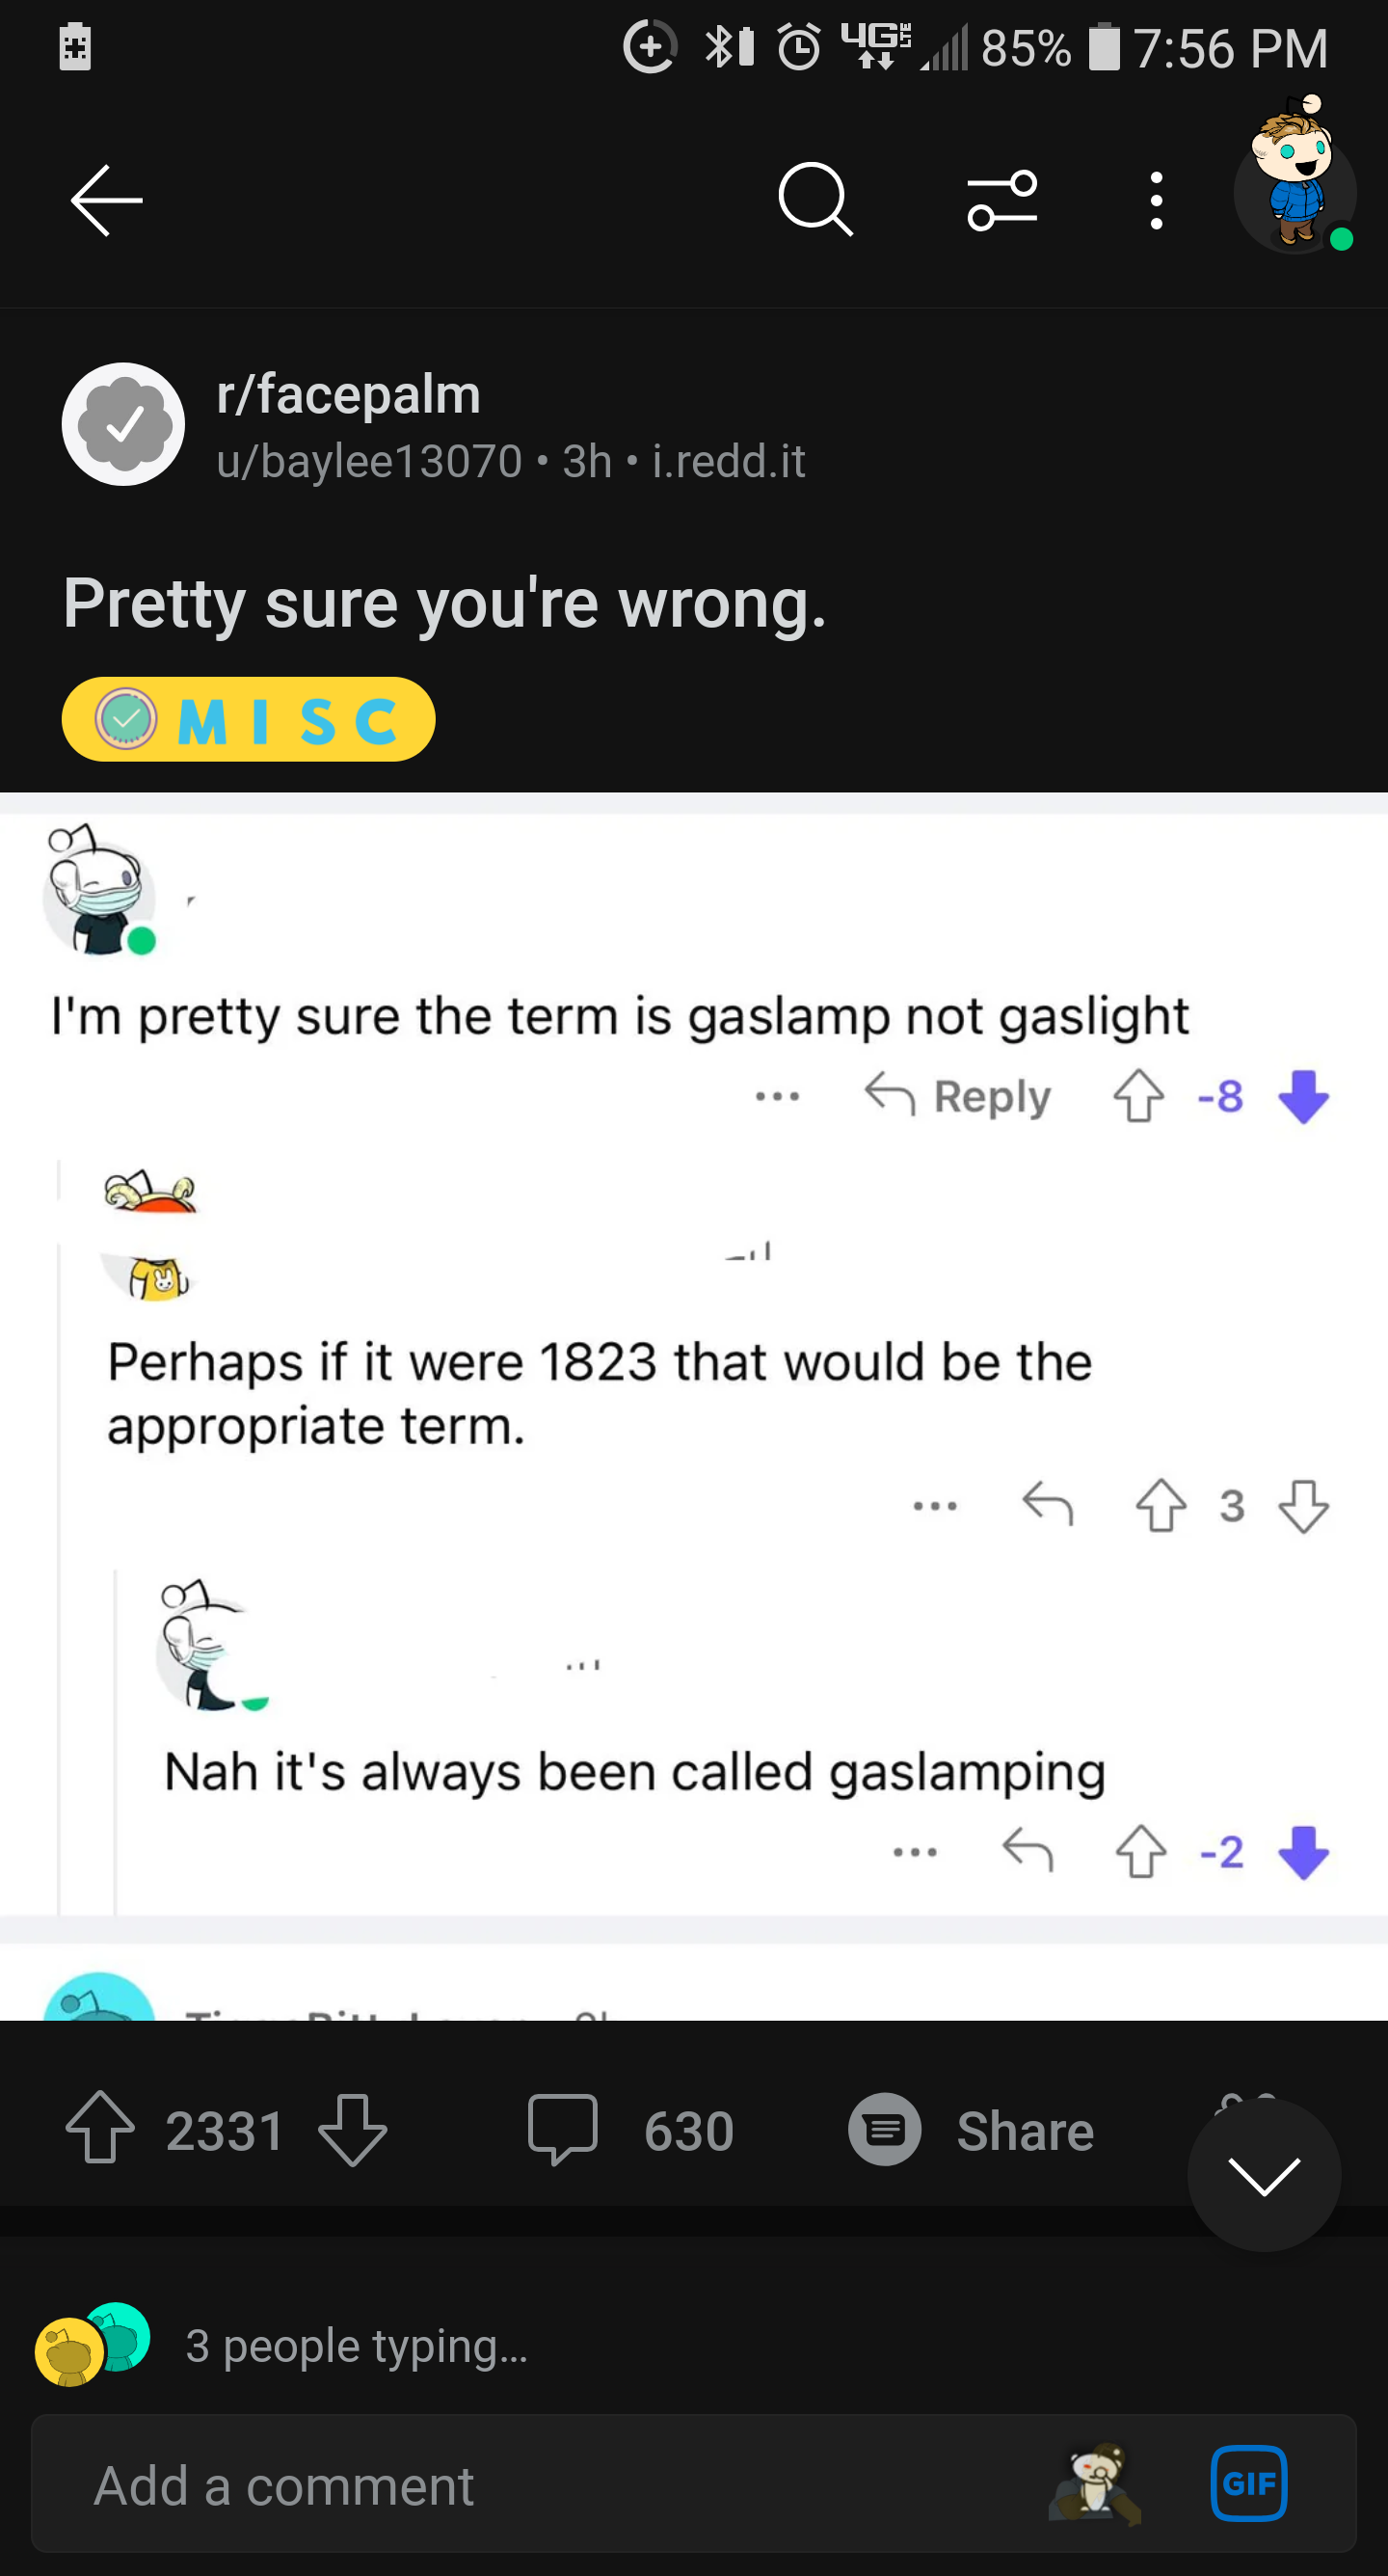 dumbs jokes - screenshot - rfacepalm ubaylee130703h1.redd.it Pretty sure you're wrong. Misc I'm pretty sure the term is gaslamp not gaslight 485 % Perhaps if it were 1823 that would be the appropriate term. 2331 Q Nah it's always been called gaslamping 3 